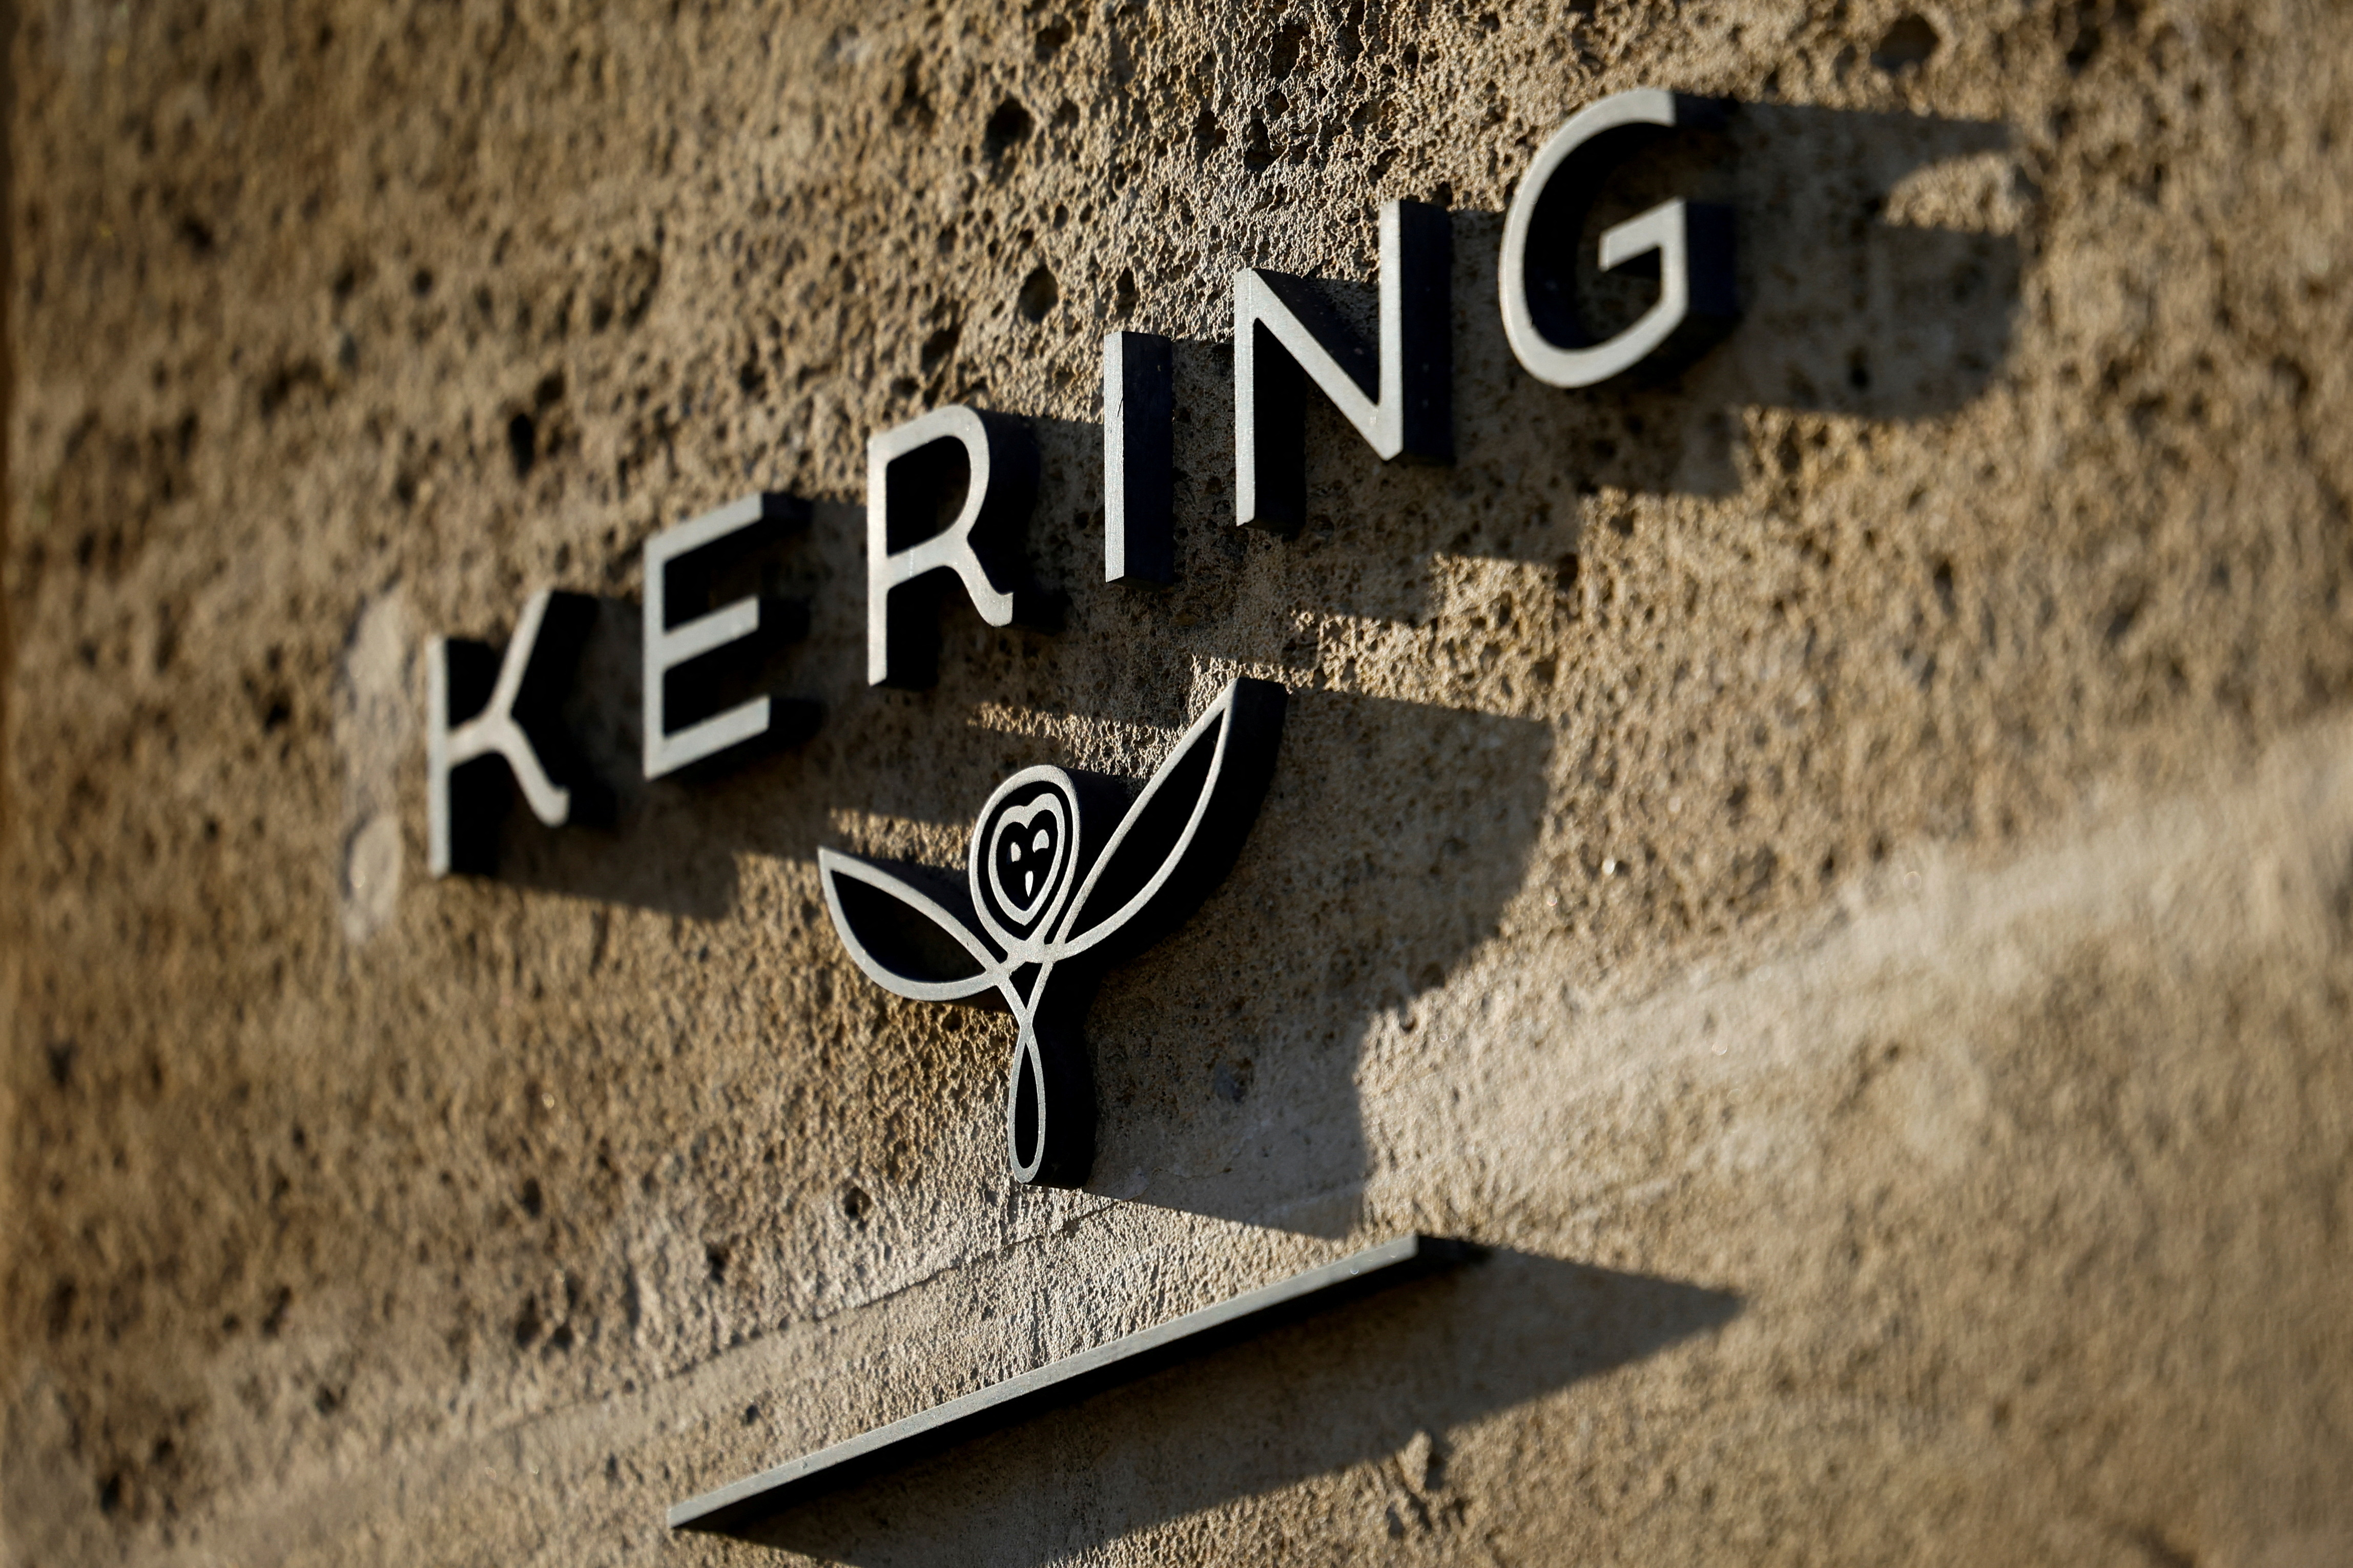 Kering Group acquires luxury perfume brand Creed - HIGHXTAR.